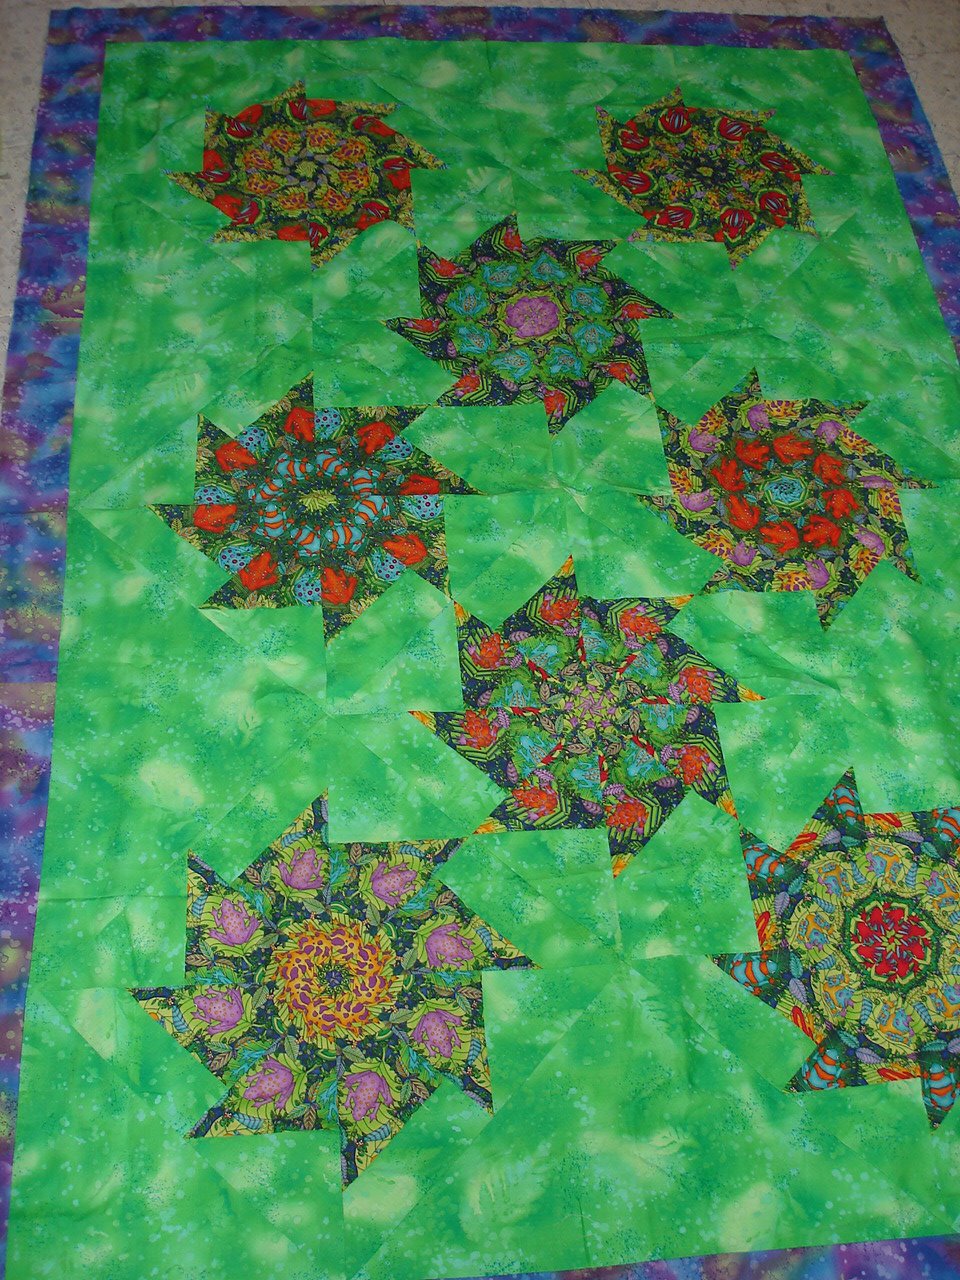 [Quilts+July+2008+002.jpg]